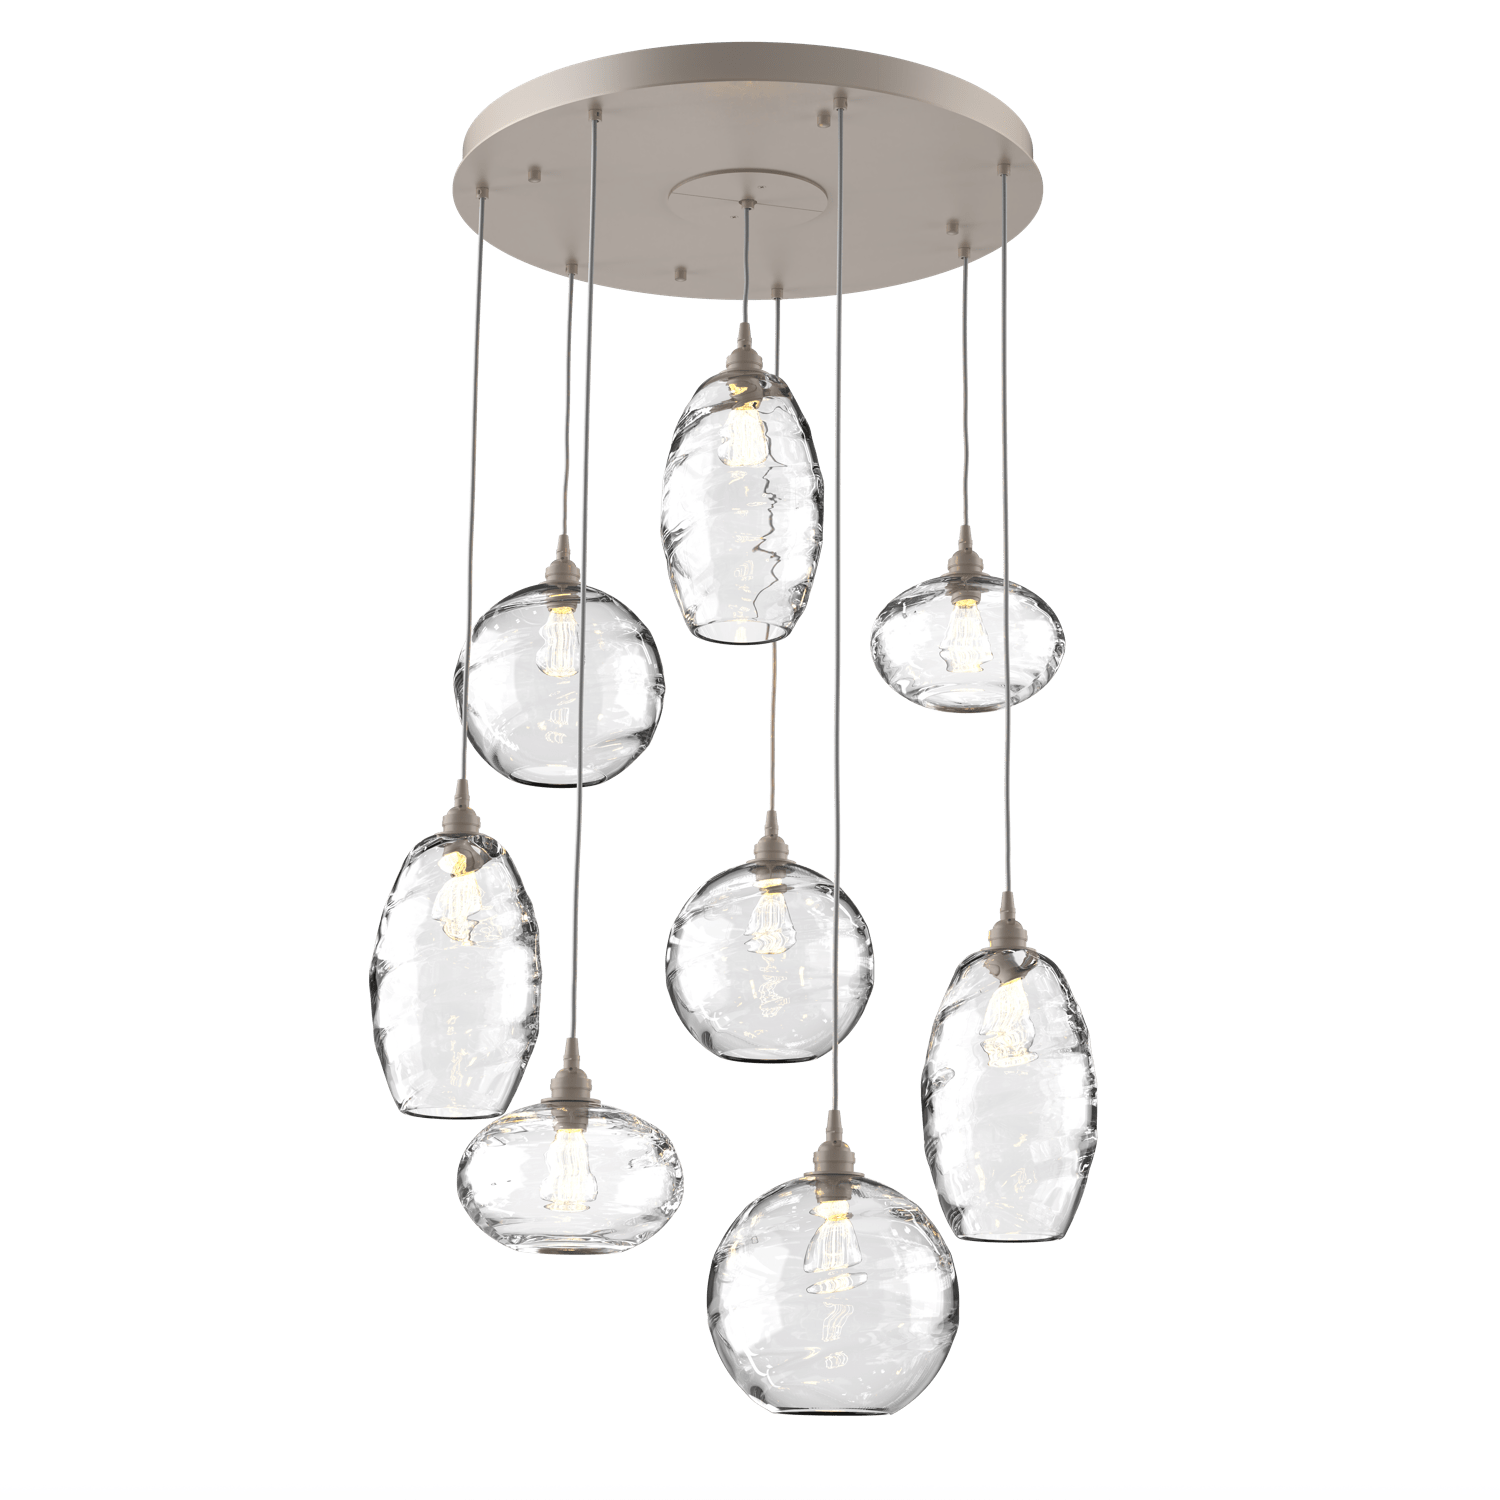 CHB0048-08-BS-OC-Hammerton-Studio-Optic-Blown-Glass-Misto-8-light-round-pendant-chandelier-with-metallic-beige-silver-finish-and-optic-clear-blown-glass-shades-and-incandescent-lamping